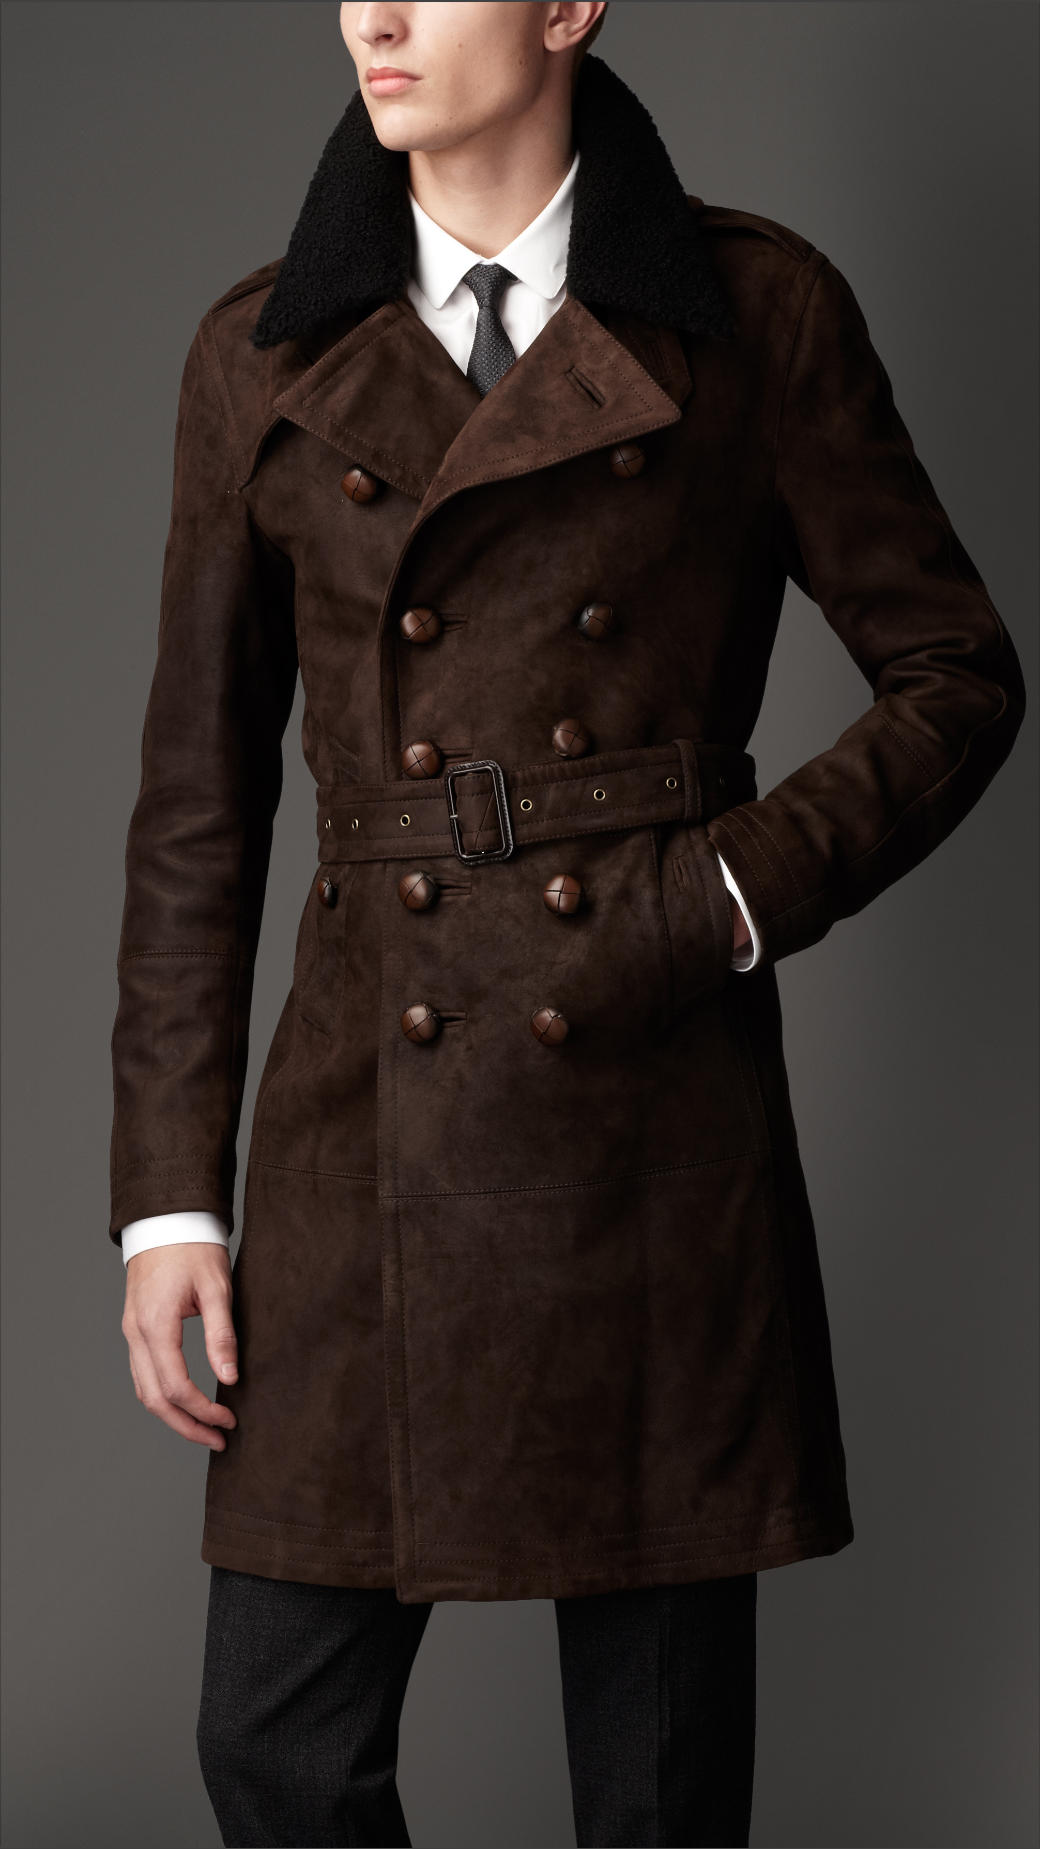 Men's Brown Mid-Length Shearling Collar Suede Trench Coat | Suede ...